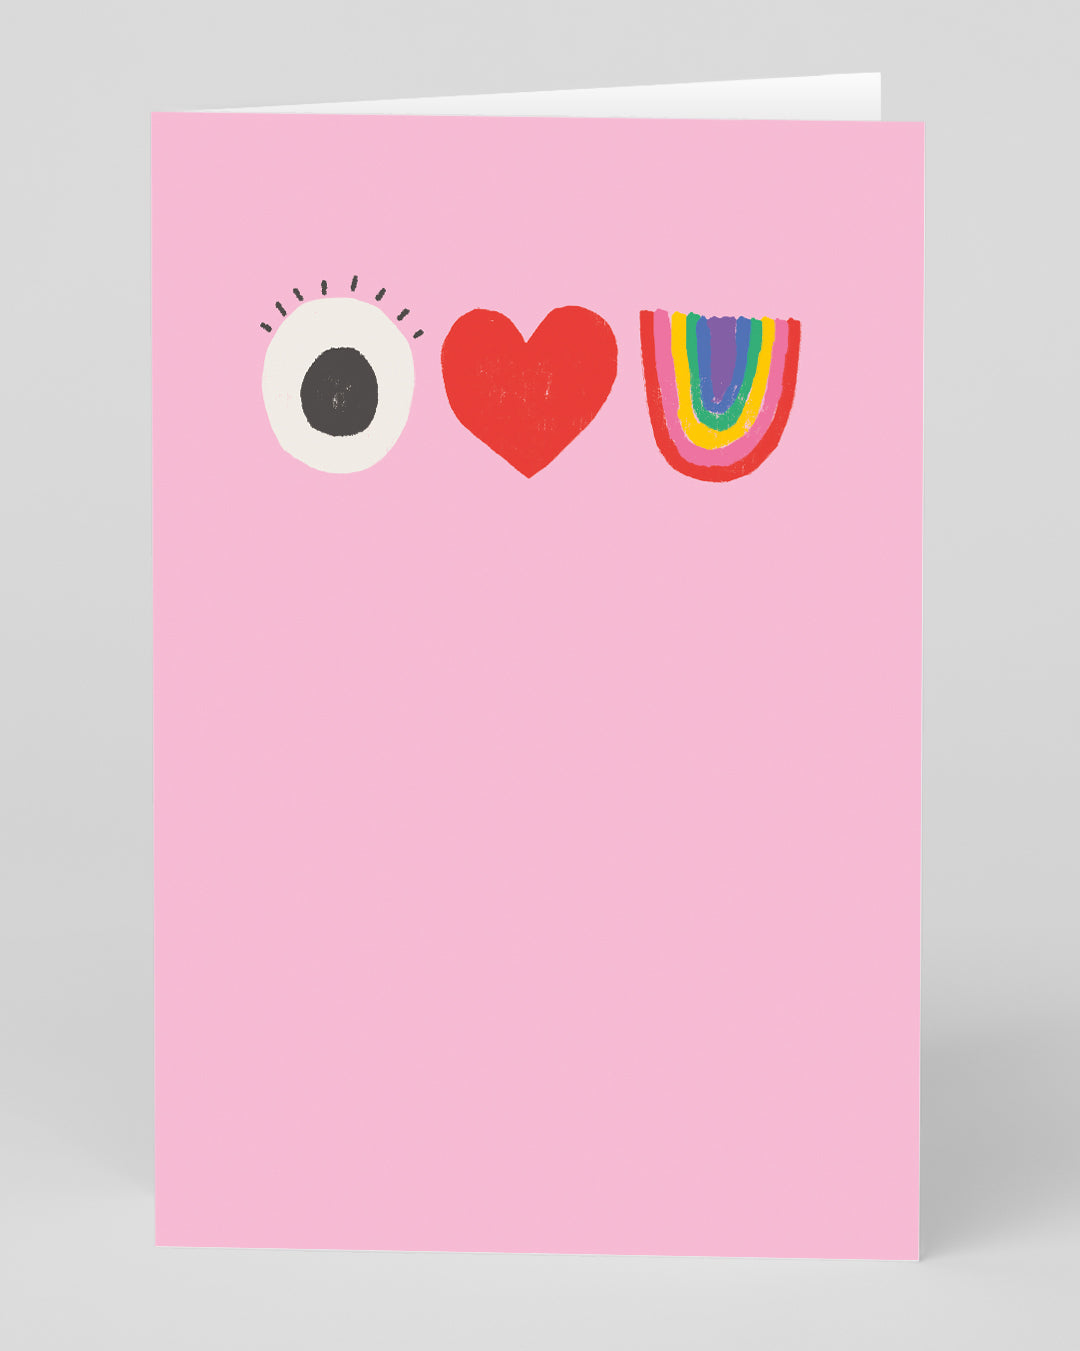 Valentine’s Day | Cute Valentines Card For Him or Her | Personalised I Love You Symbols Card | Ohh Deer Unique Valentine’s Card | Artwork by Emily Doliner | Made In The UK, Eco-Friendly Materials, Plastic Free Packaging